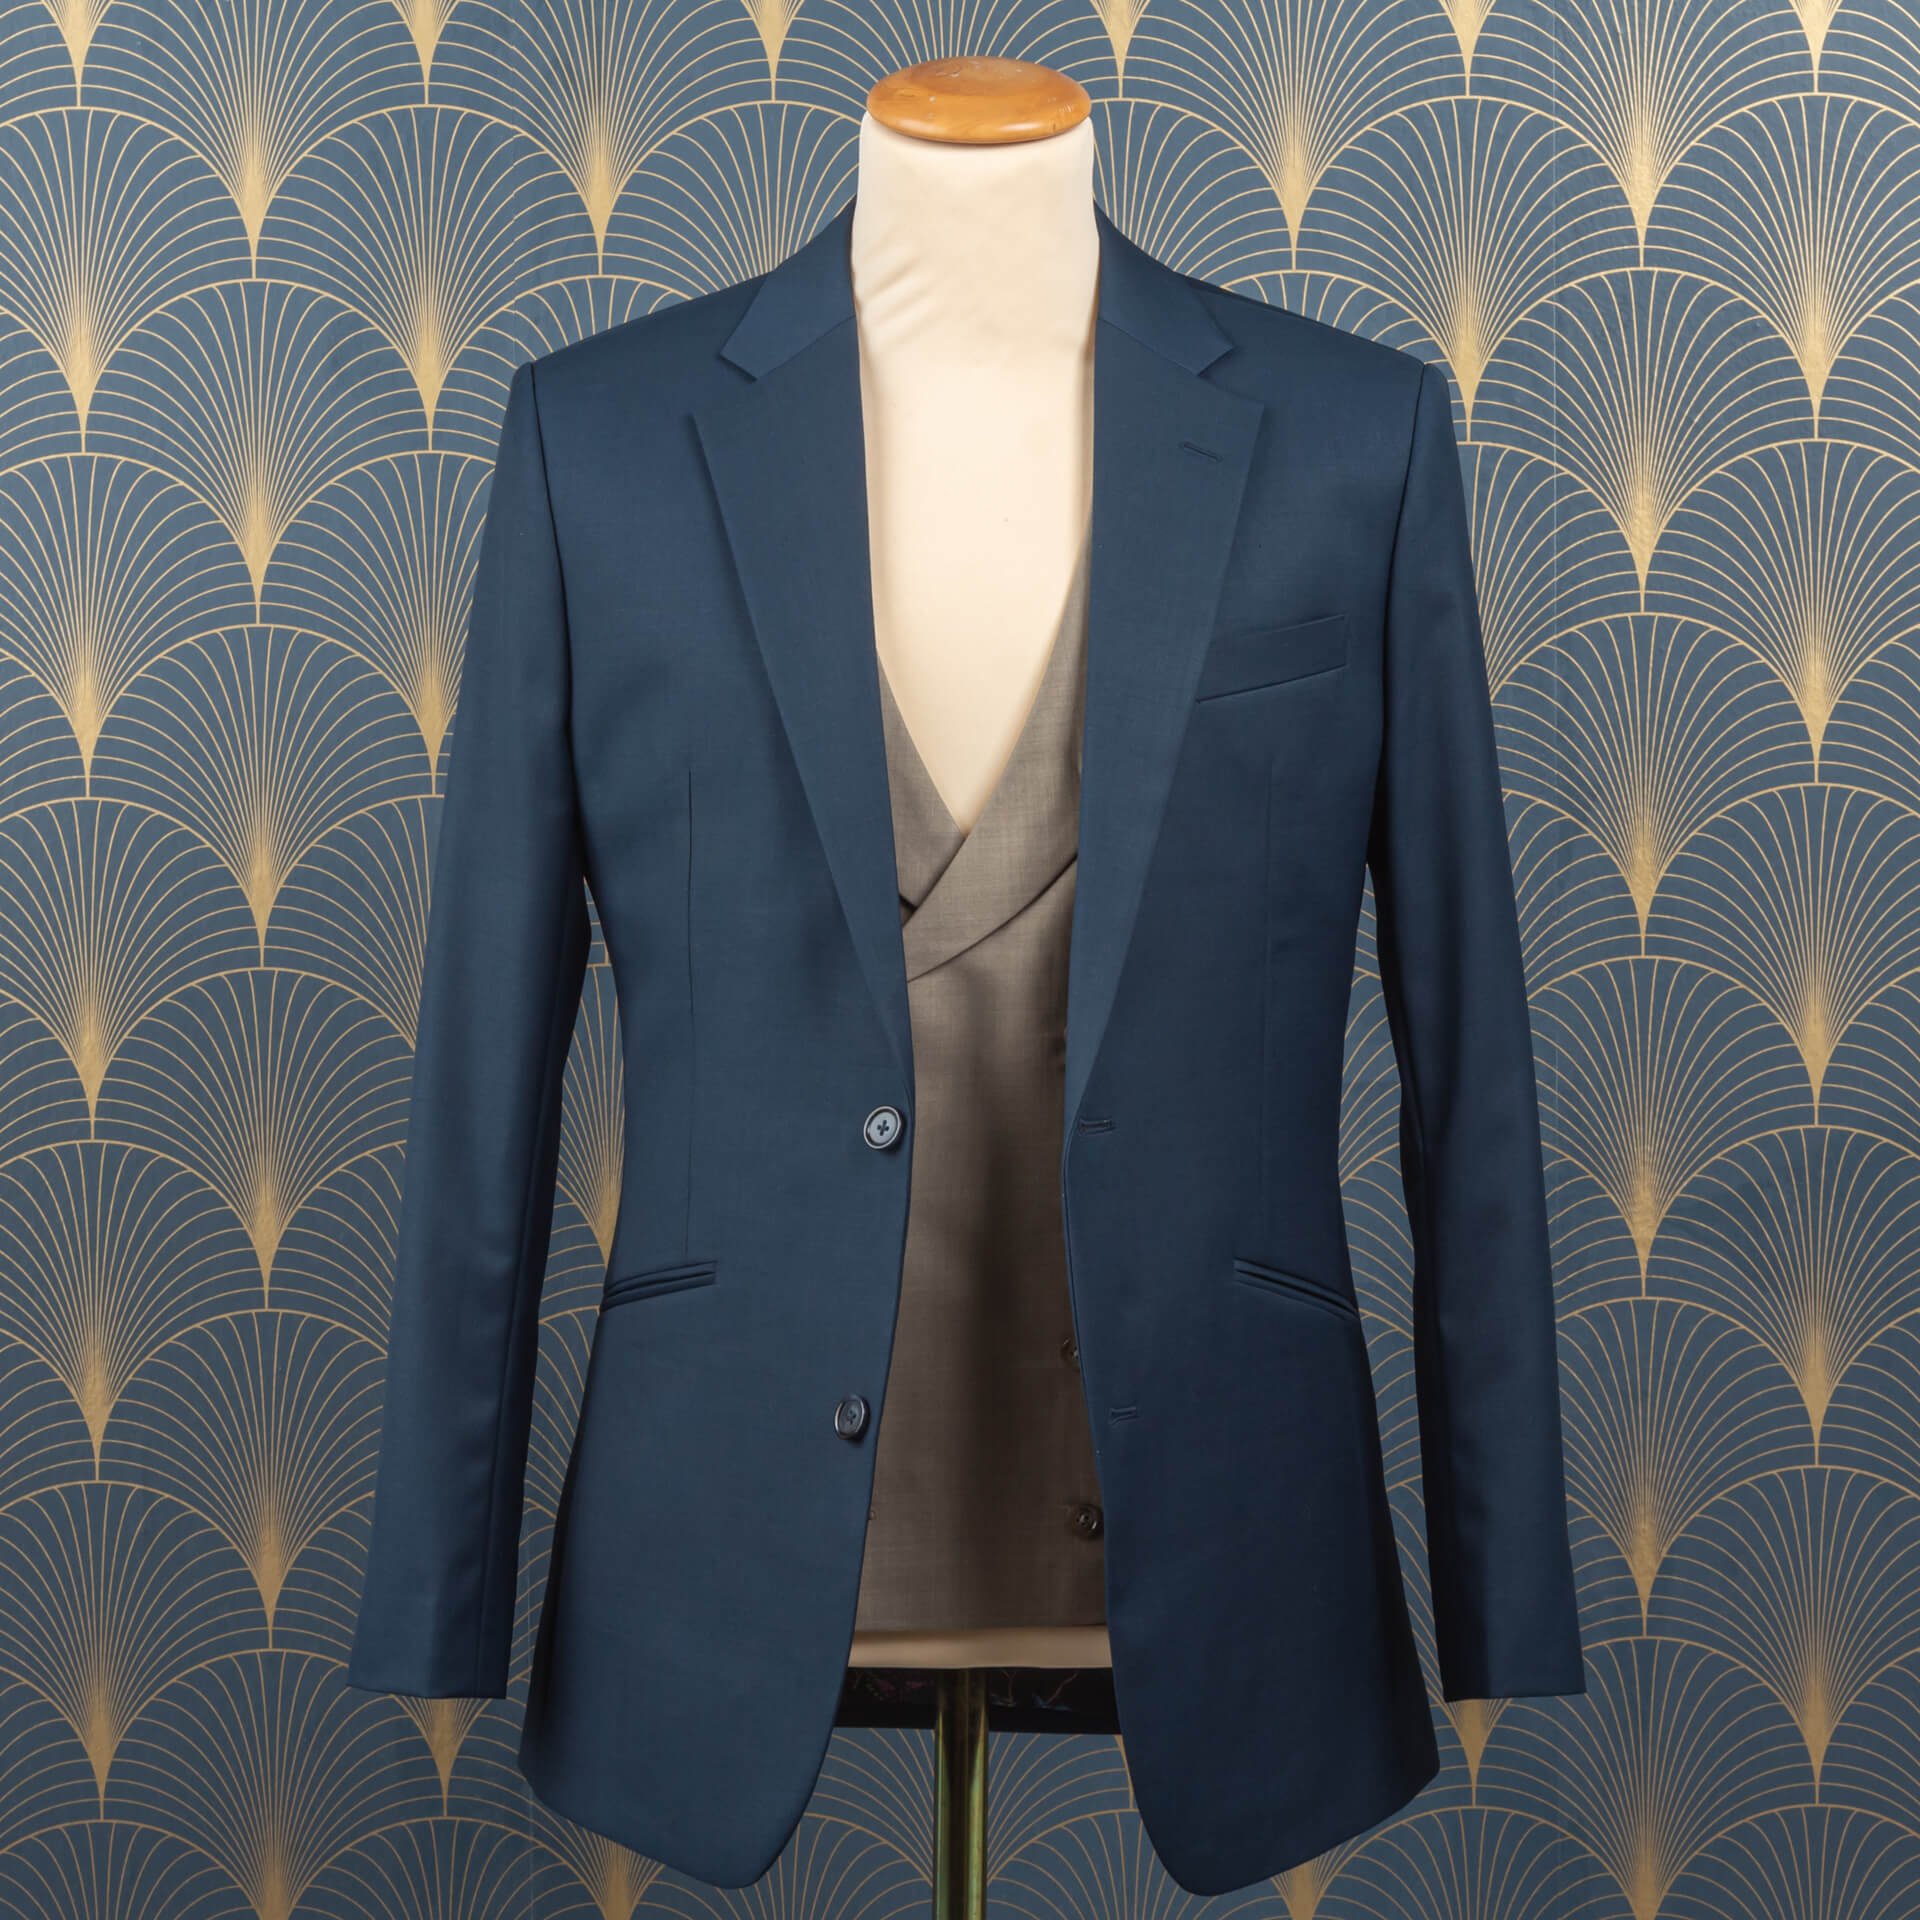 Teal Blue Suit with Toffee Brown Double Breasted Waistcoat 2.jpg